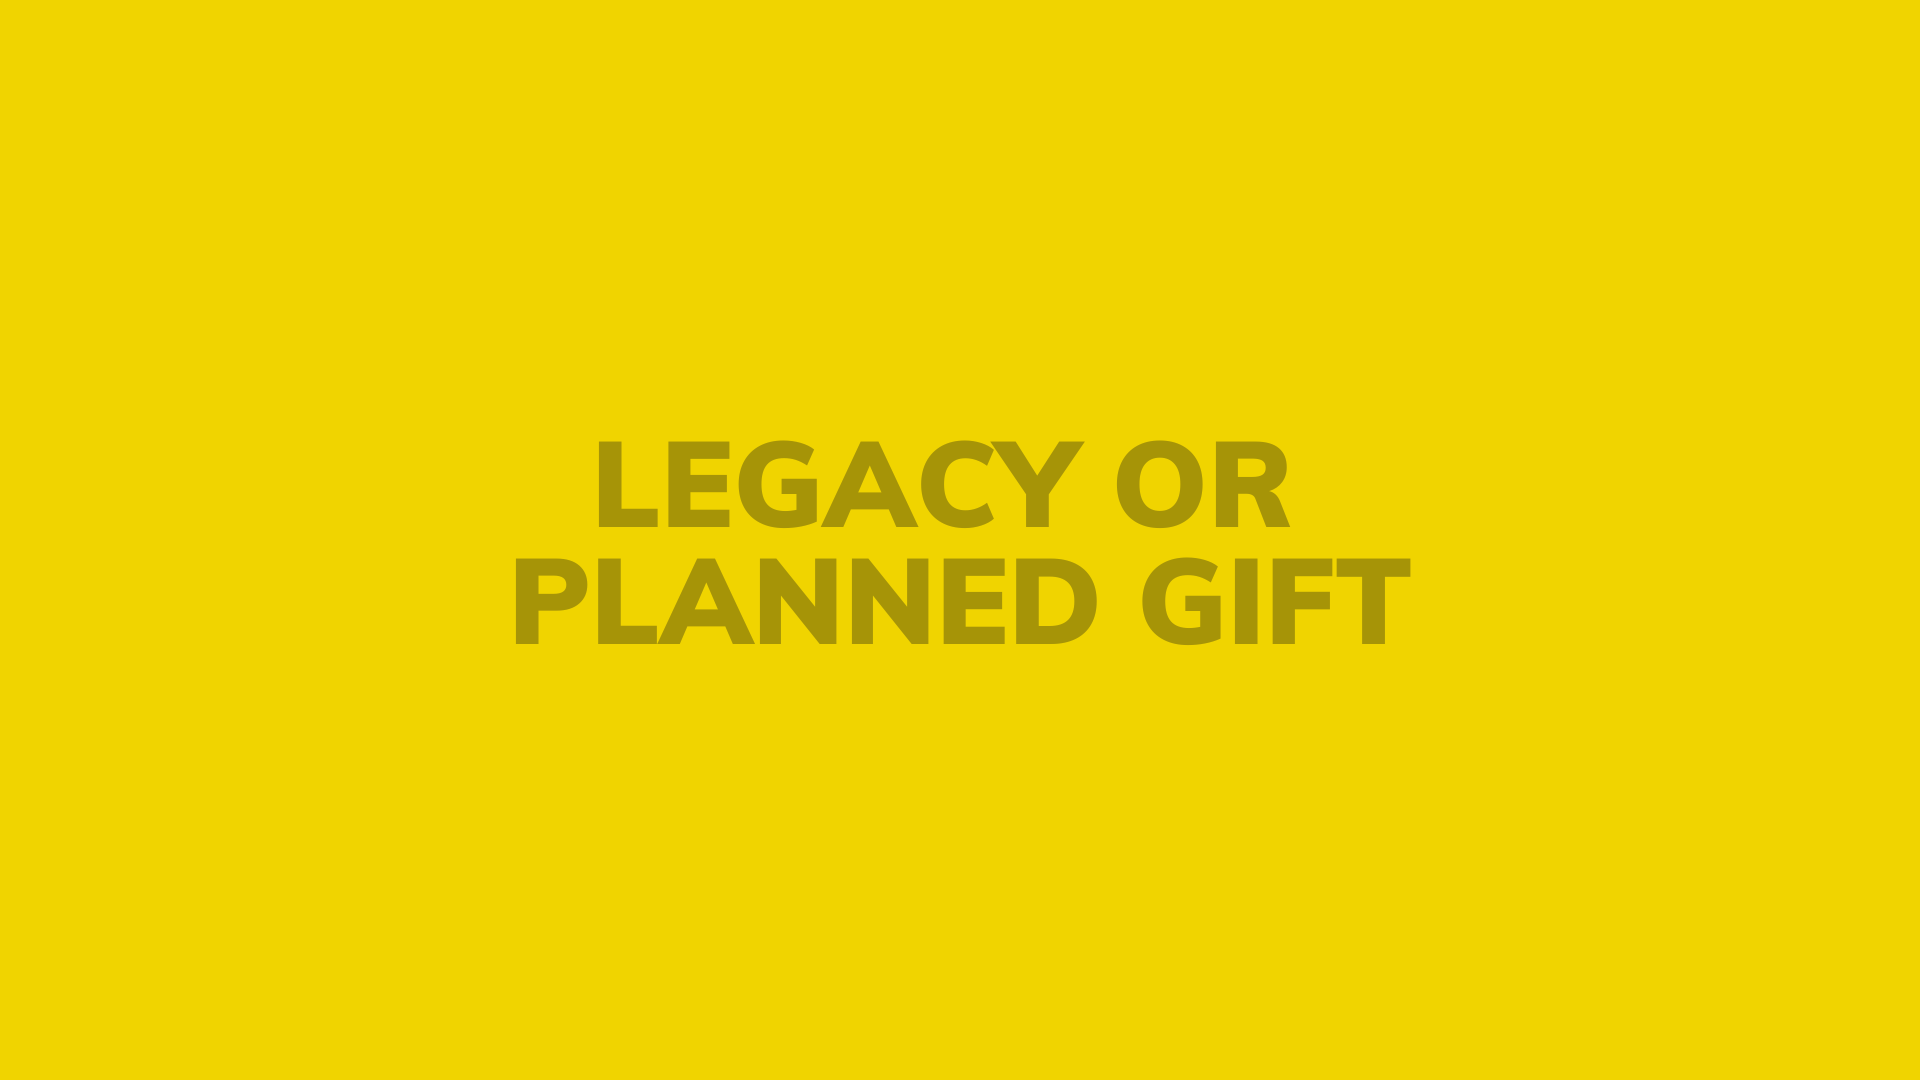 LEGACY OR PLANNED GIFT